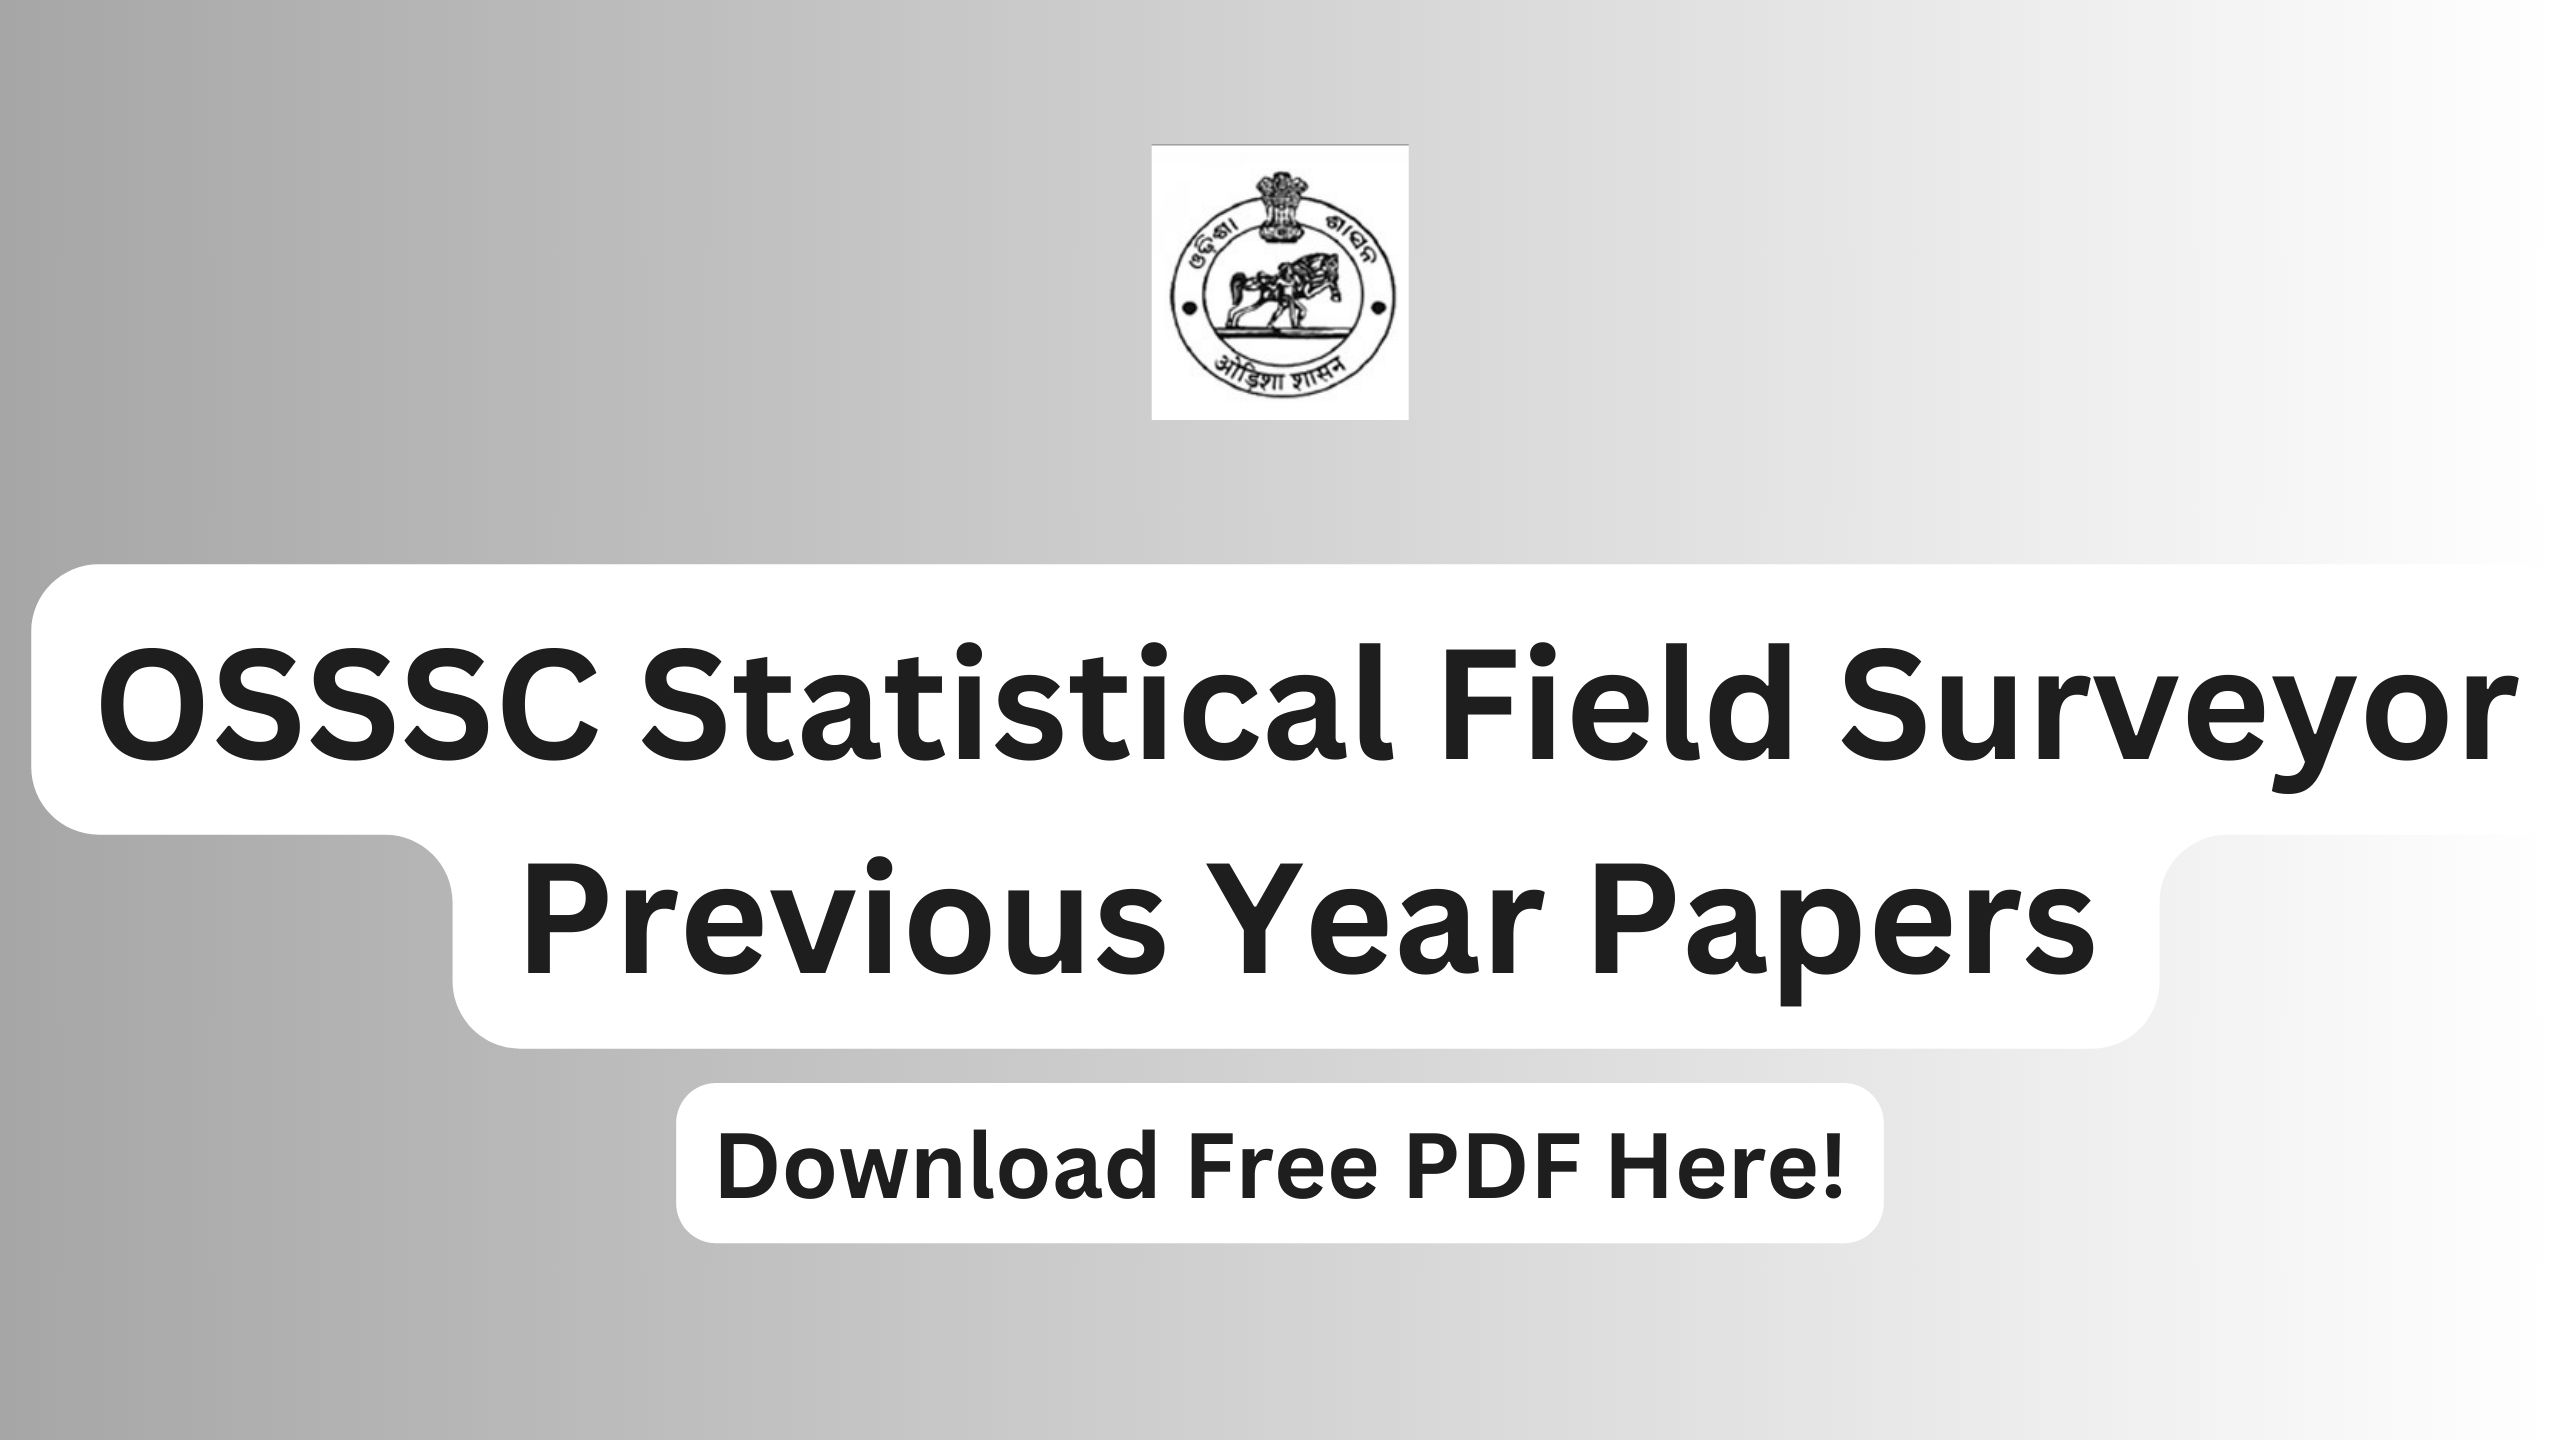 OSSSC Statistical Field Surveyor Previous Year Papers